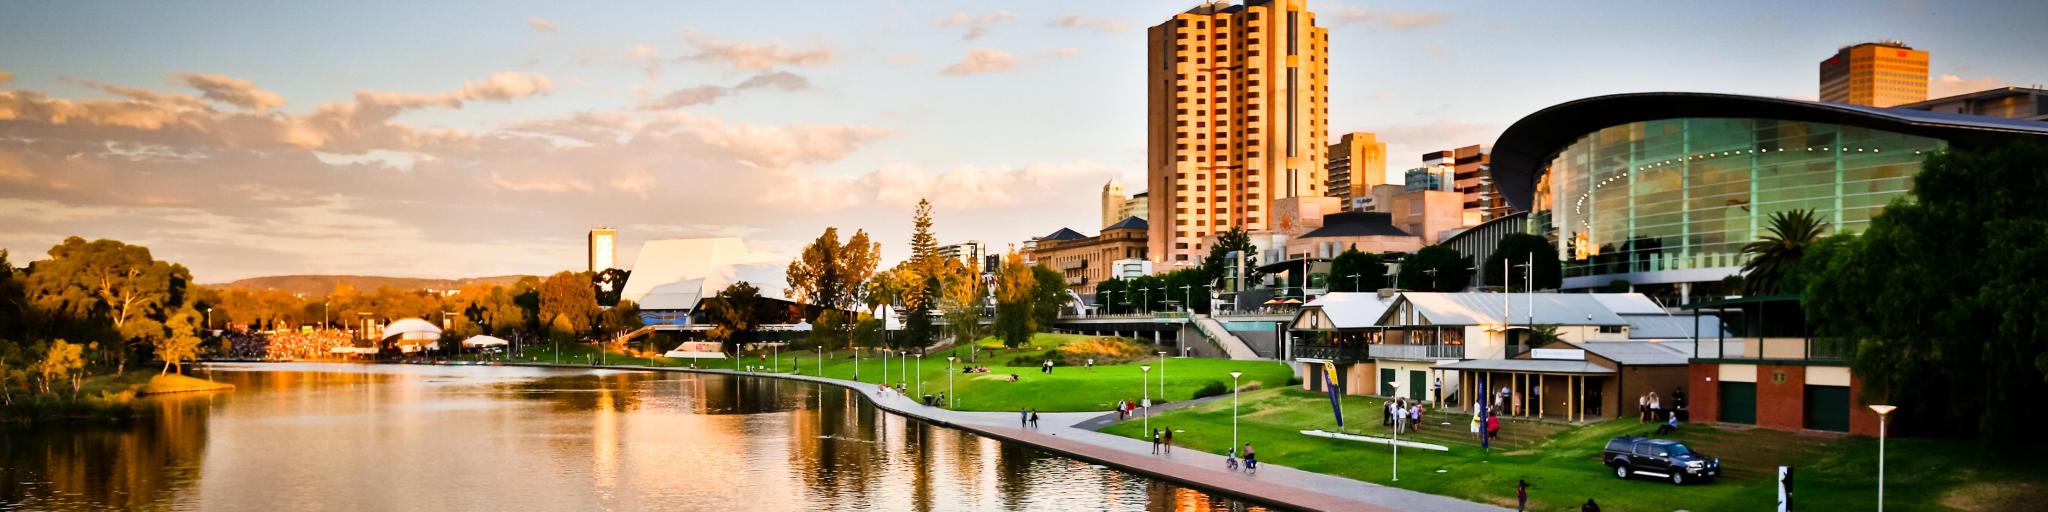 Adelaide skyline showing the river and buildings, with the reflection of the buildings in the river